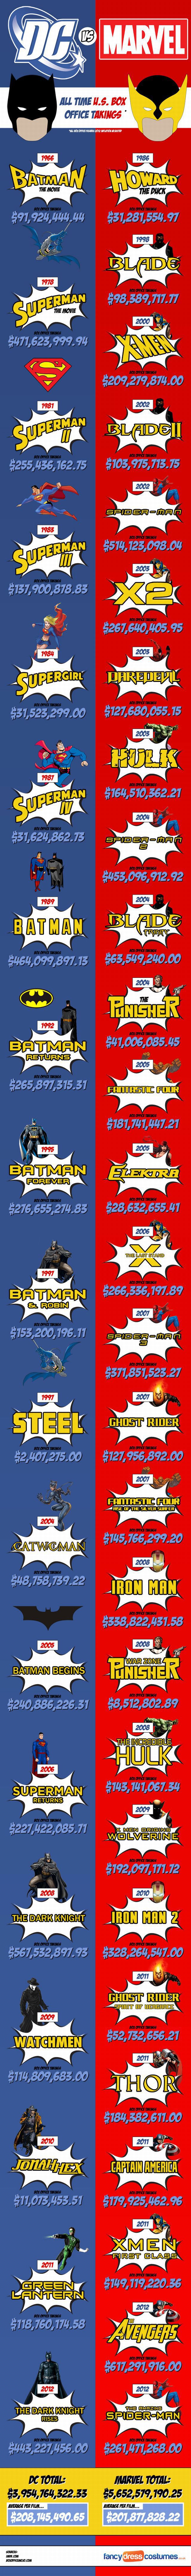 Marvel Vs. DC At The U.S. Box Office [INFOGRAPHIC]